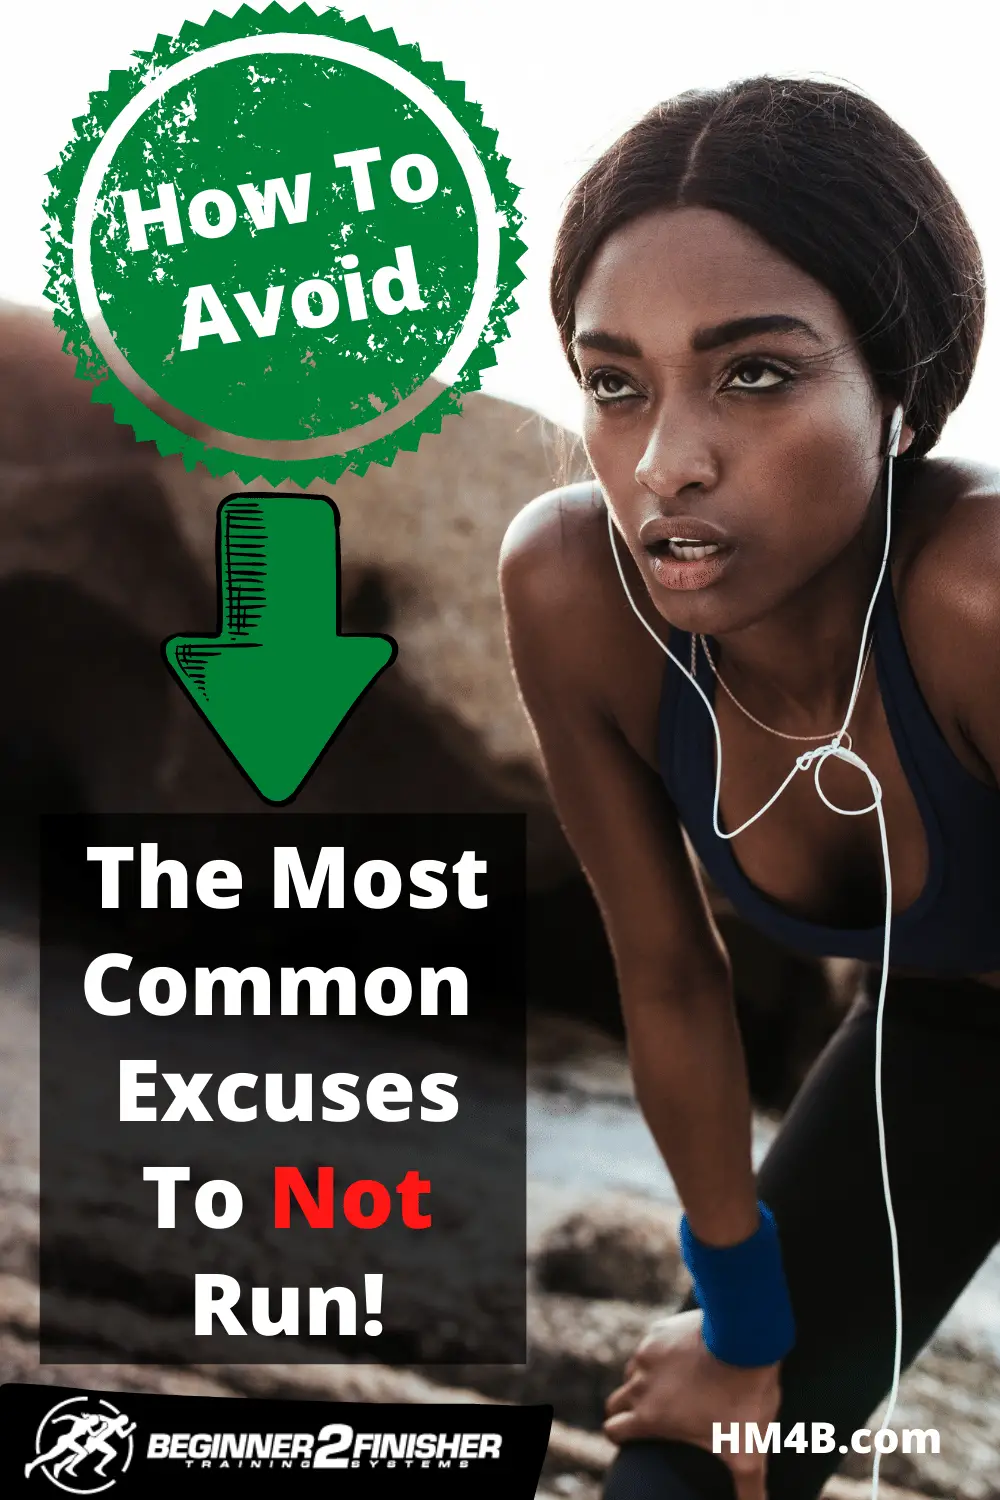 The Most Common Excuses People Use To Avoid Running